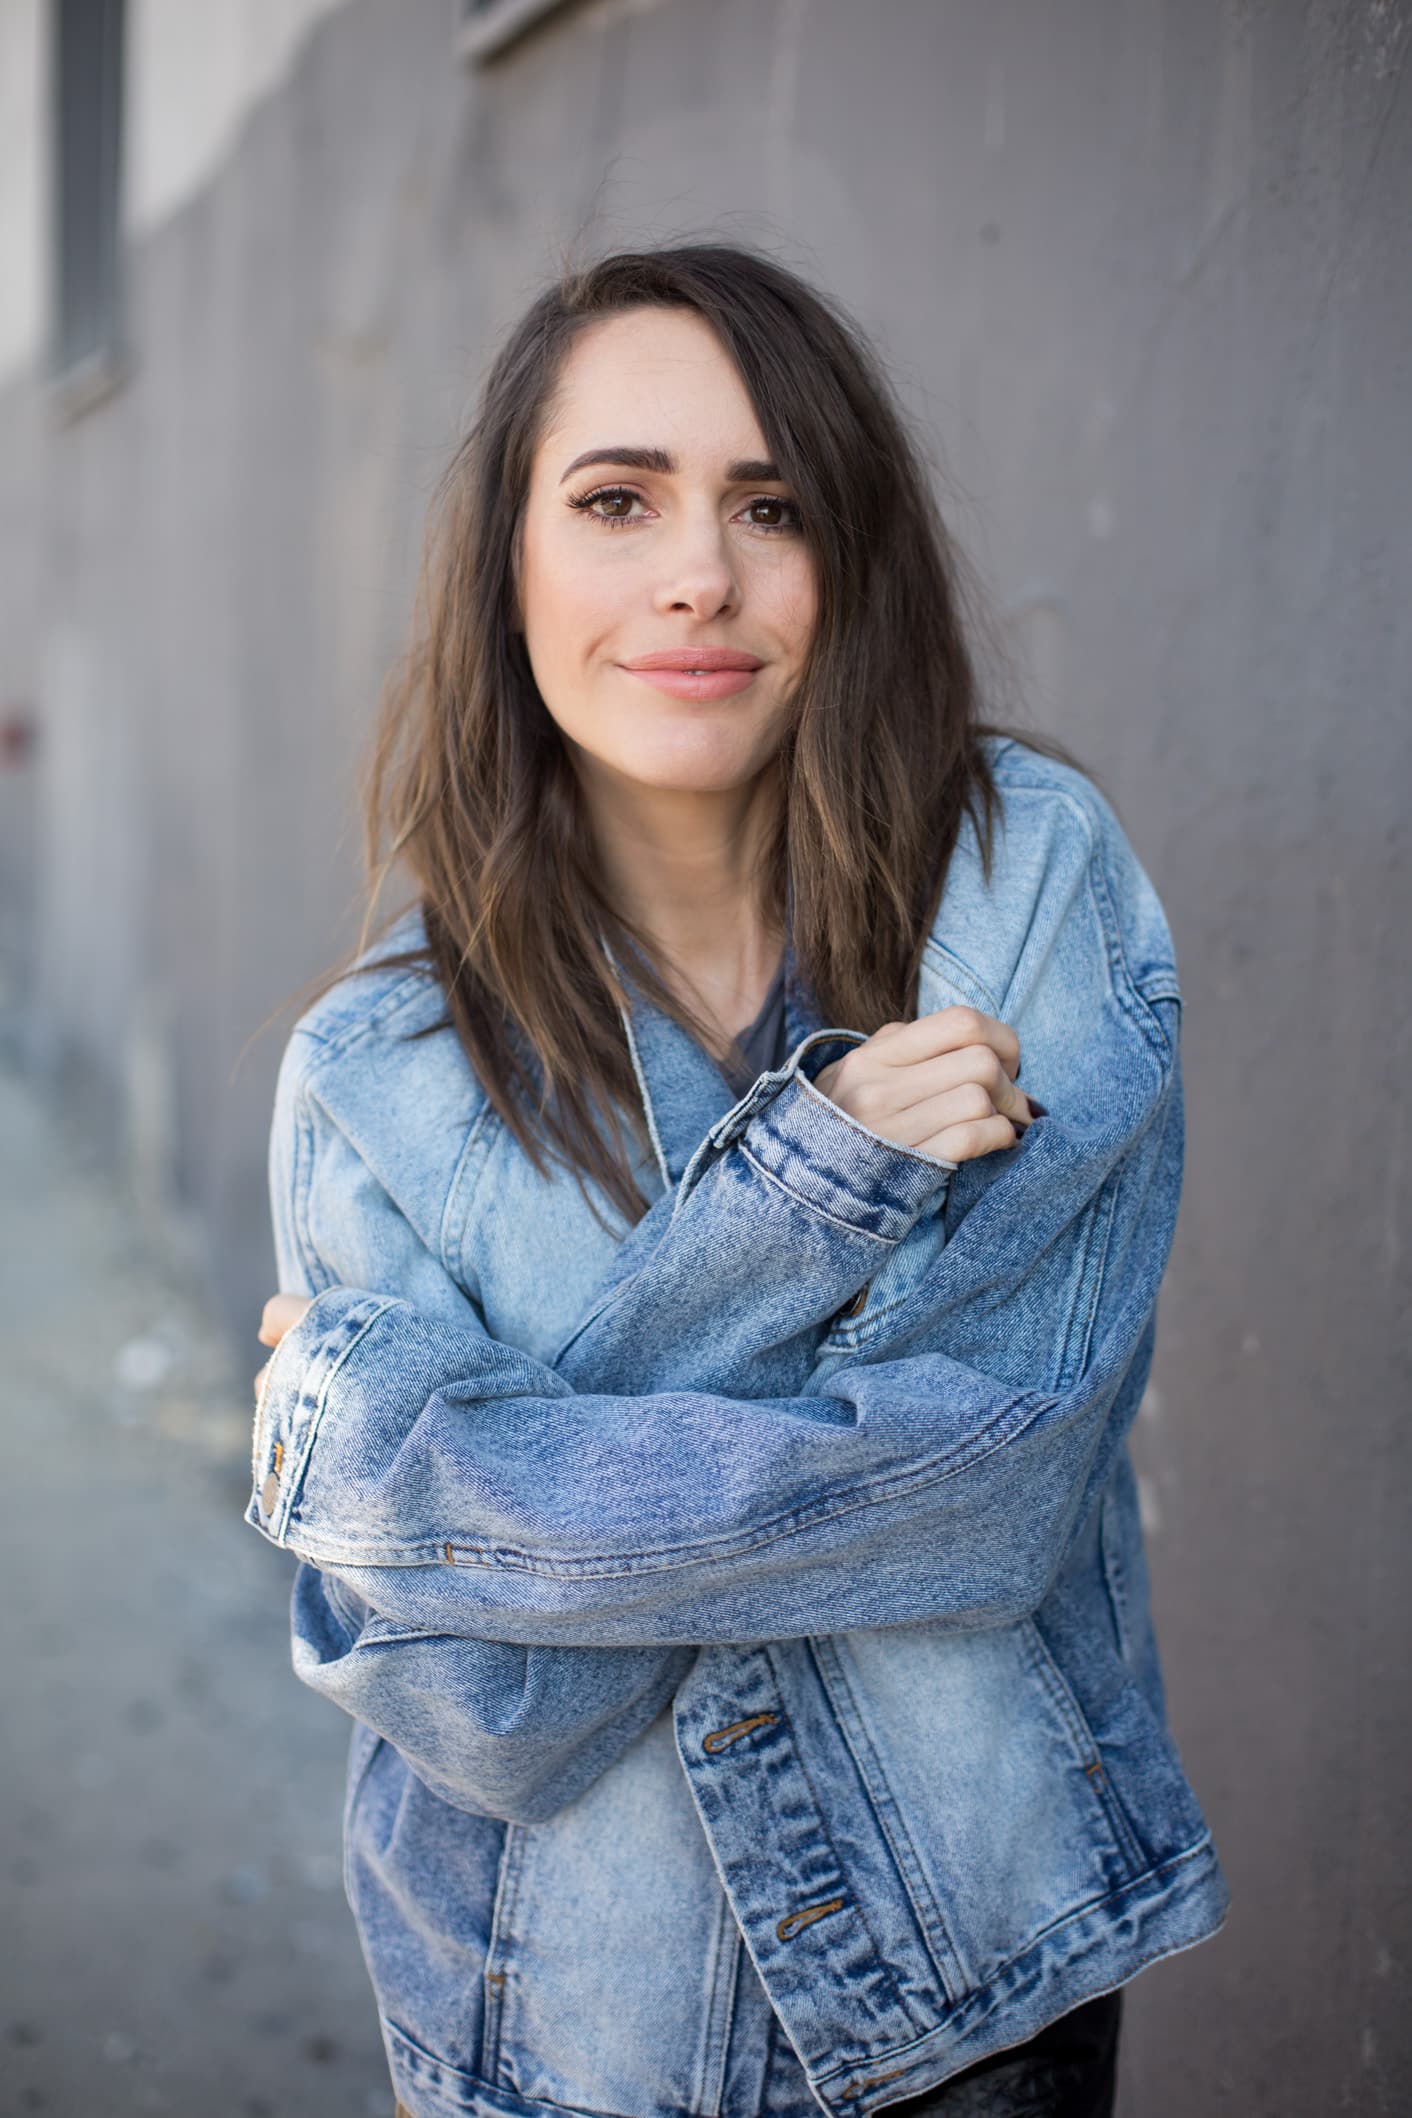 Louise Roe wearing a denim jacket and leather skirt